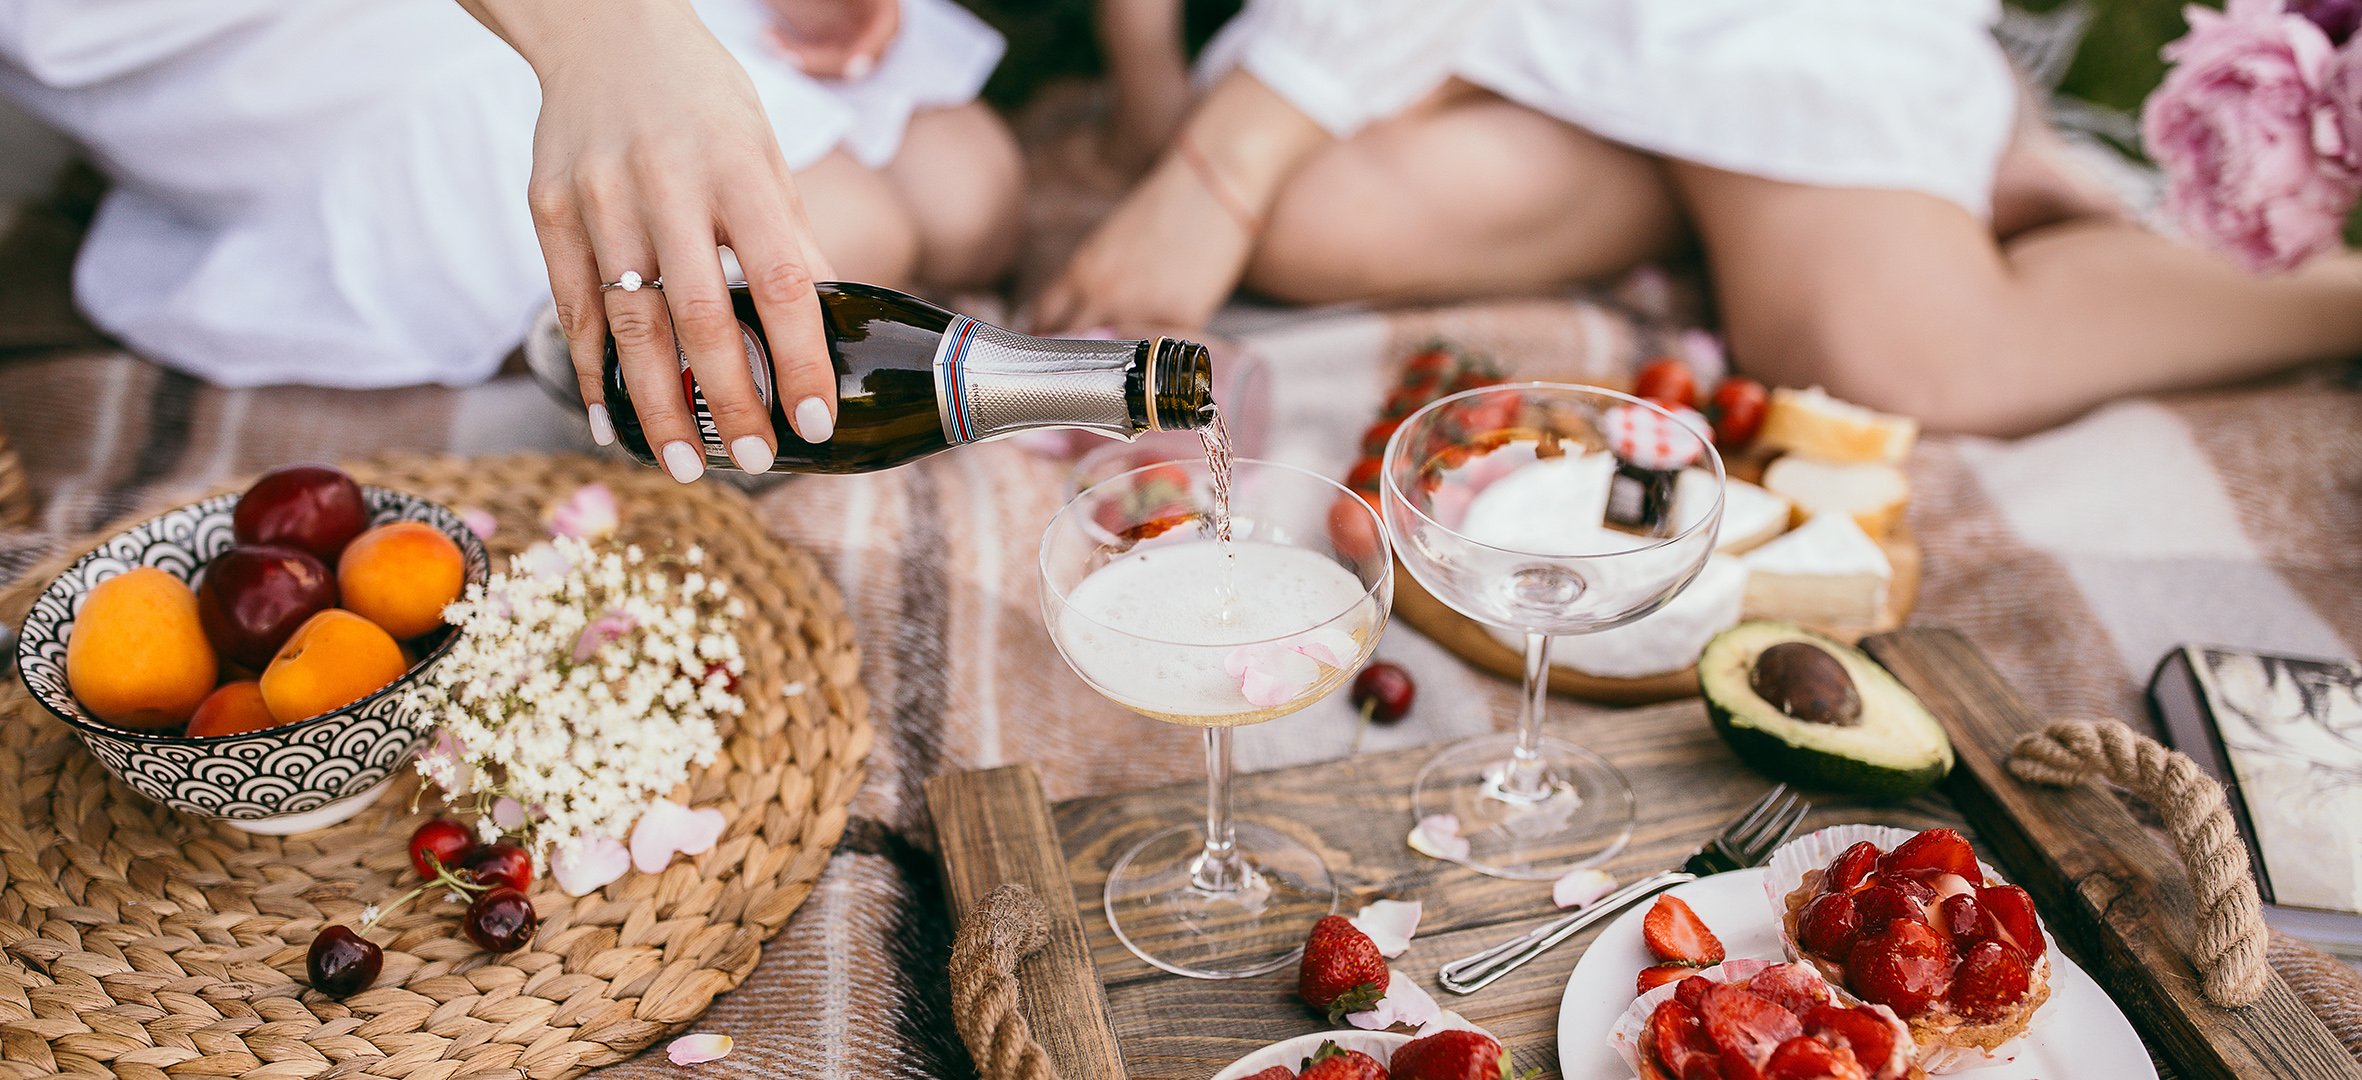 CHAMPAGNE-AND-PICNIC-PAIRINGS.jpg